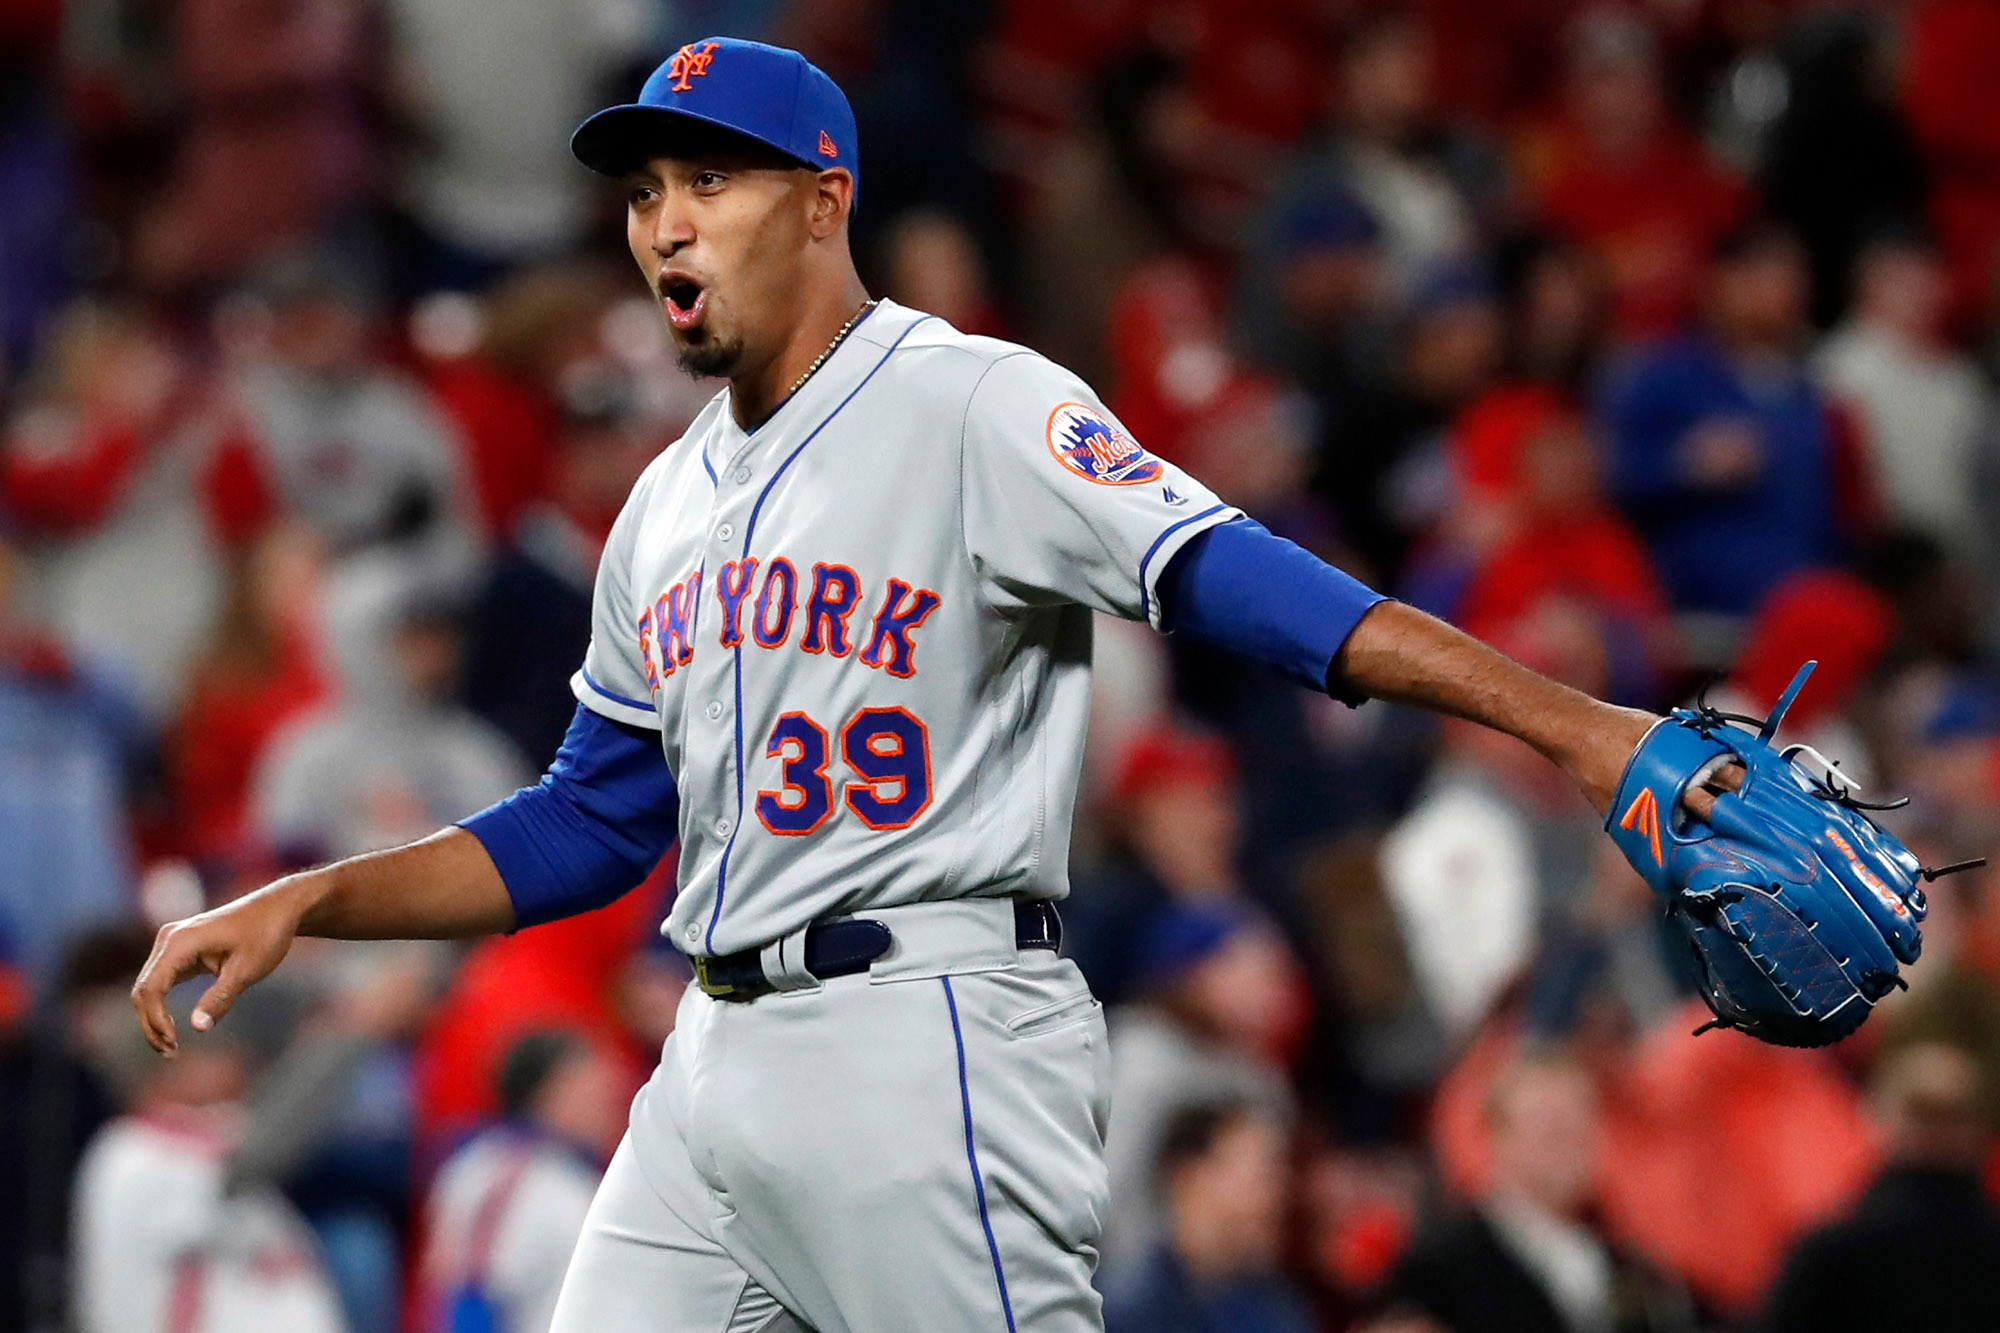 The ‘bad guy’ mentality driving Mets’ Edwin Diaz - Fitness & Diets ...